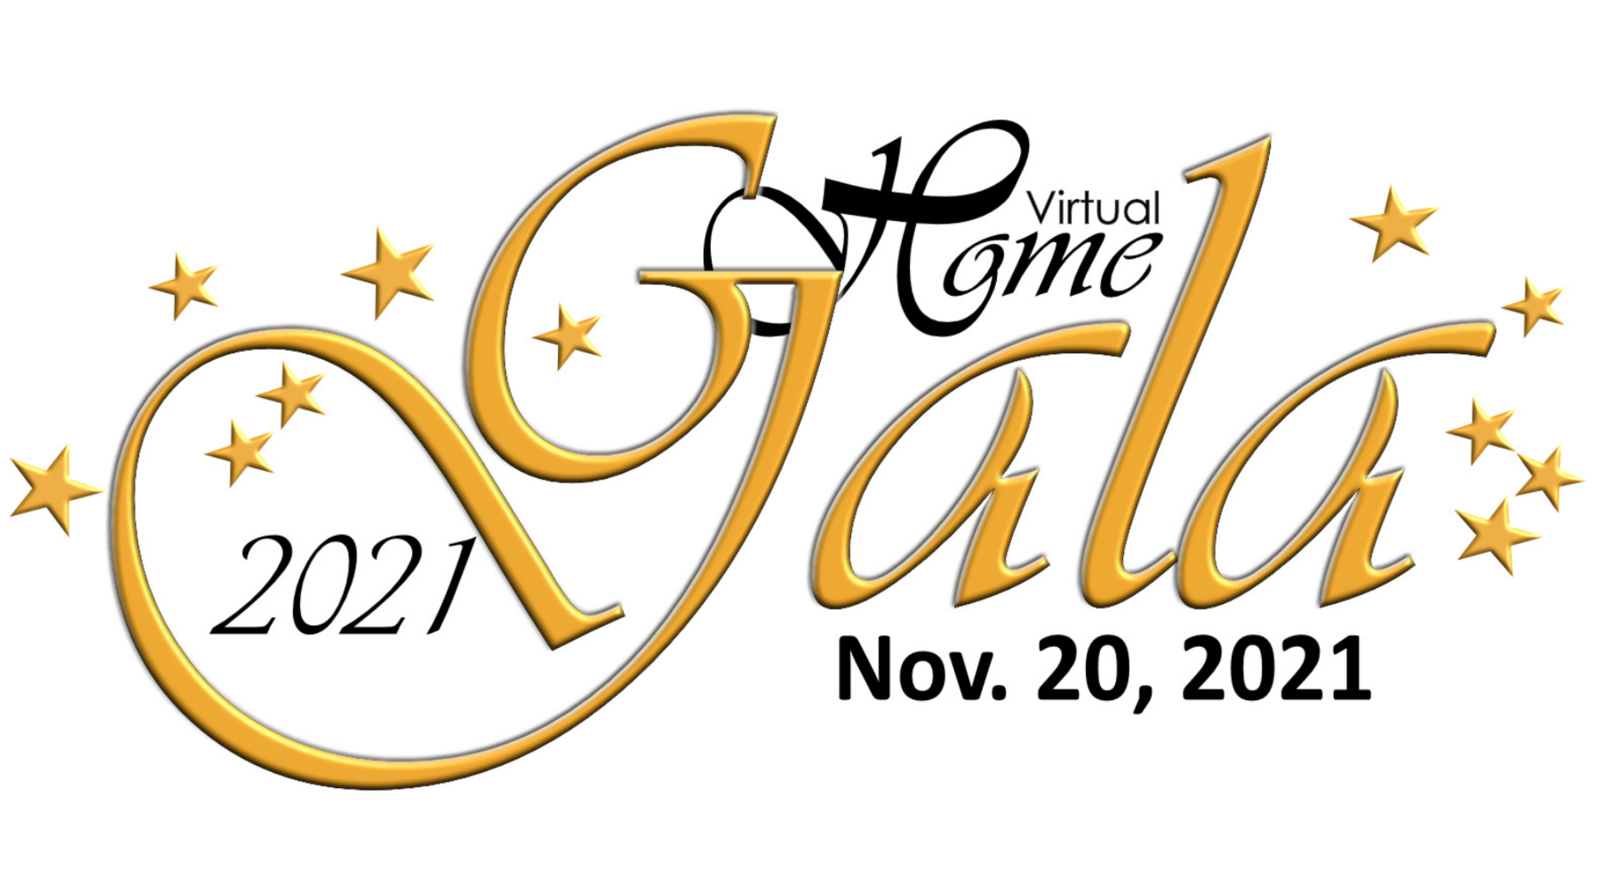 /online/TheHummData/Articles/202110/almonte-general-home-gala-2021.png